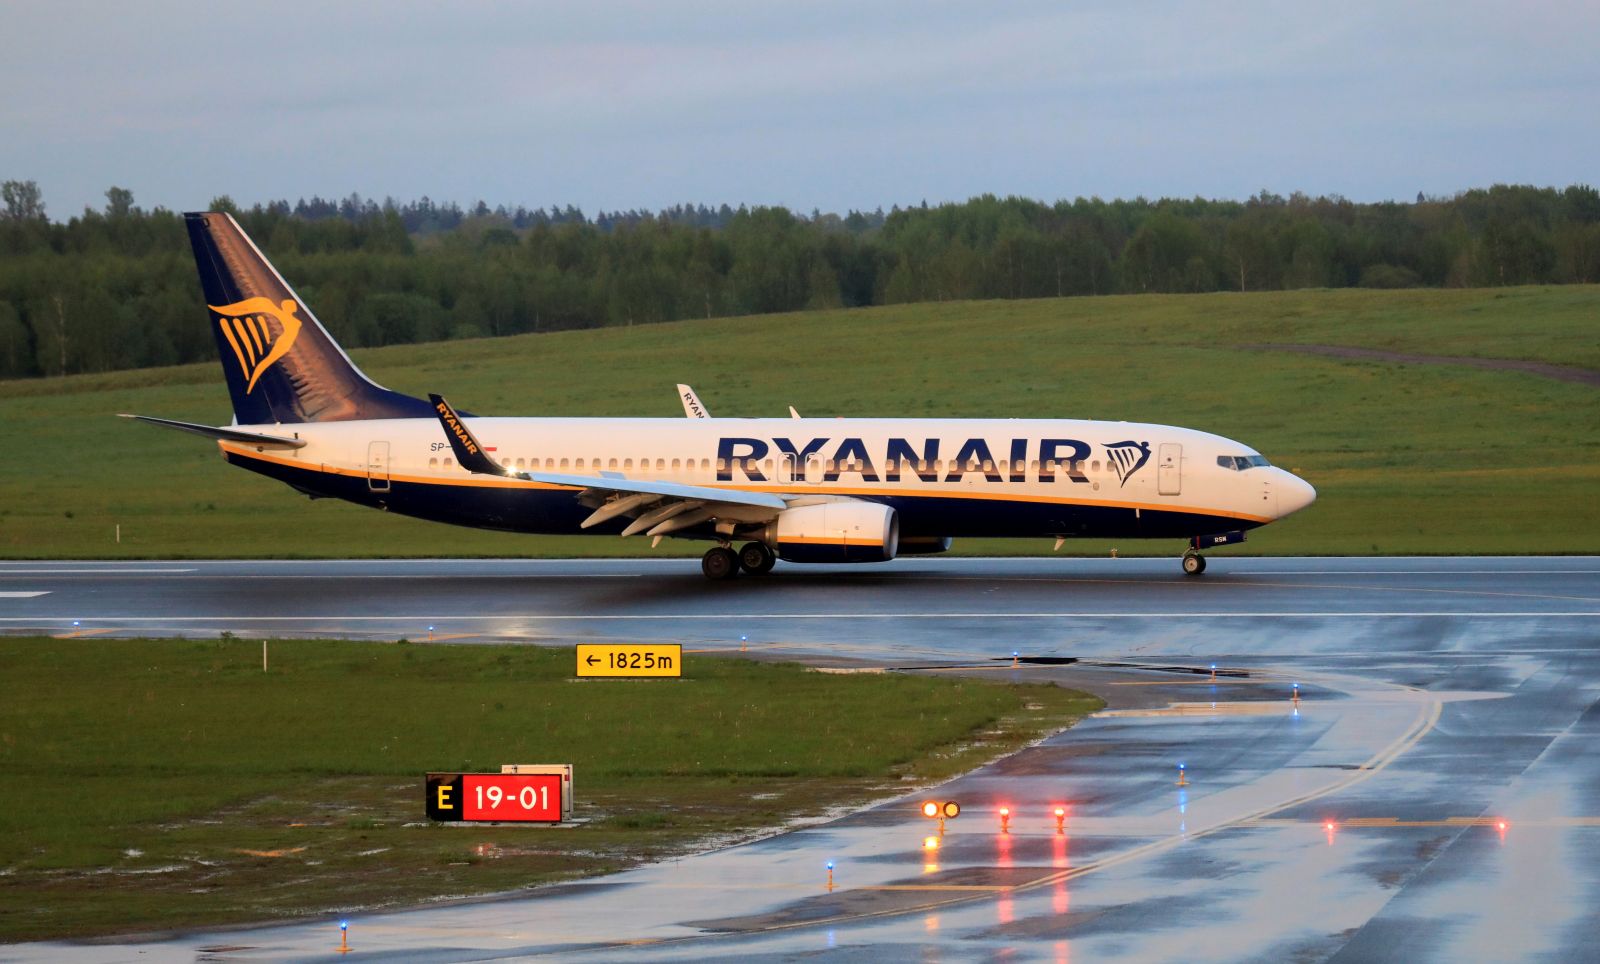 epa09224274 A Ryanair Boeing 737-800 lands in the Vilnius International Airport, in Vilnius, Lithuania, 23 May 2021. As Ryanair spokeswoman said, 'the aircraft carrying scores of passengers from Athens to Vilnius was diverted to the Belarusian capital under the escort of a Mig-29 fighter jet after its crew was notified by authorities in Minsk of a 'potential security threat on board'. A Ryanair flight from Athens, Greece to Vilnius, Lithuania, with Belarus' opposition journalist Roman Protasevich onboard, has been diverted and forced to land in Minsk on 23 May 2021, after alleged bomb threat. Protasevich was detained by Belarusian Police after landing, as Belarusian Human Rights Center 'Viasna' reports and Lithuanian President Gitanas Nauseda demanded immediate release of Protasevich.  EPA/STRINGER